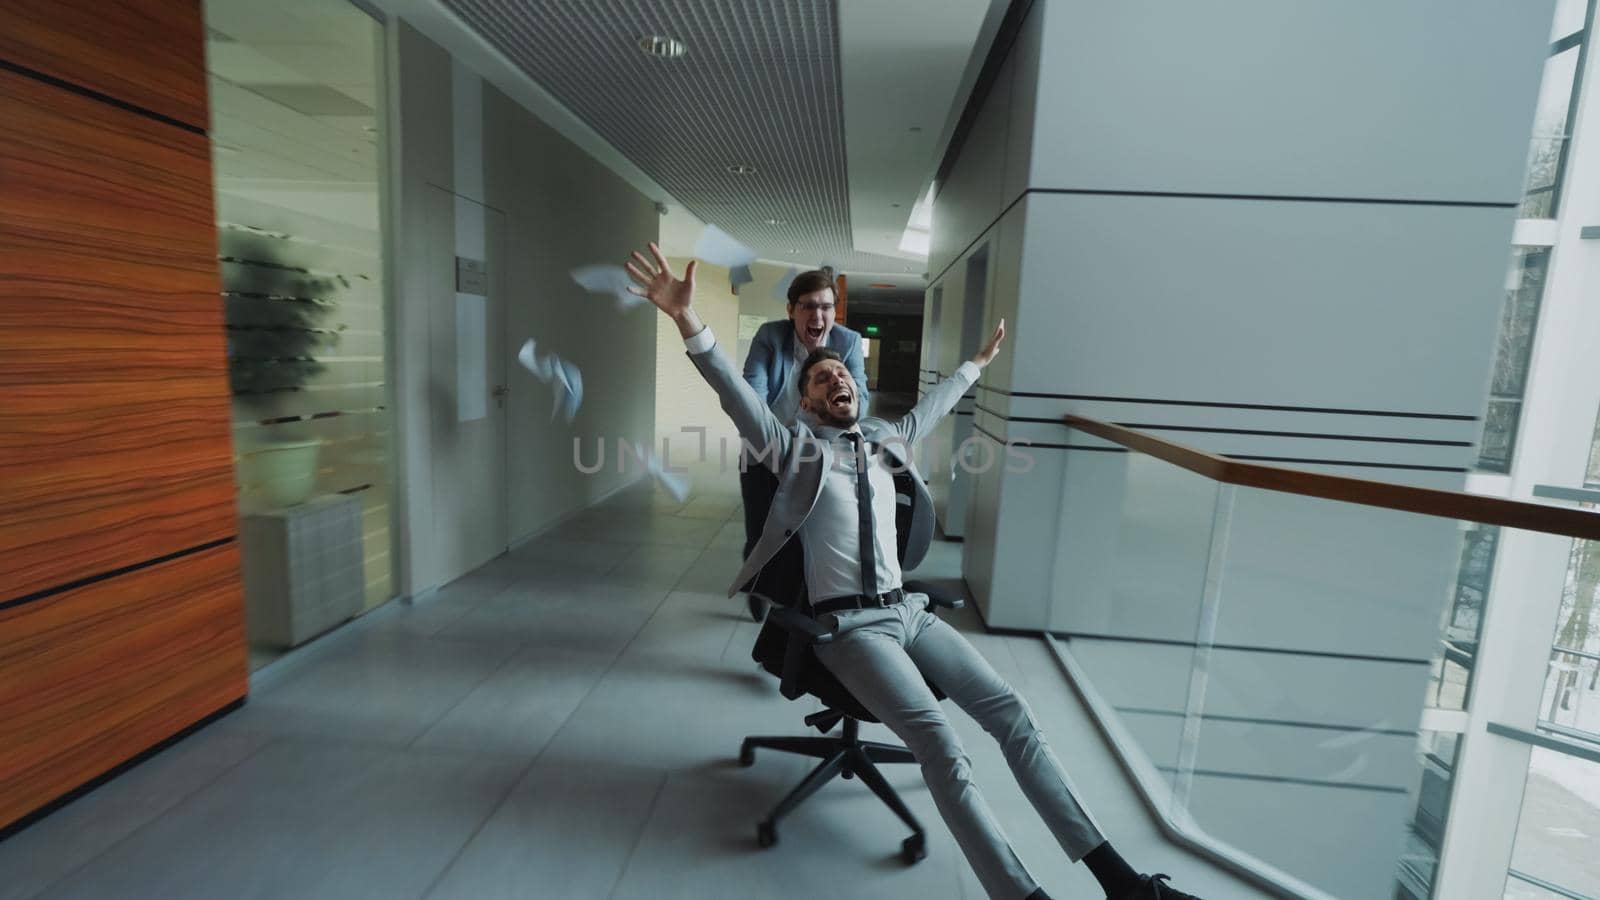 Two crazy businessmen riding office chair and throwing papers up while having fun in lobby of modern business center indoors